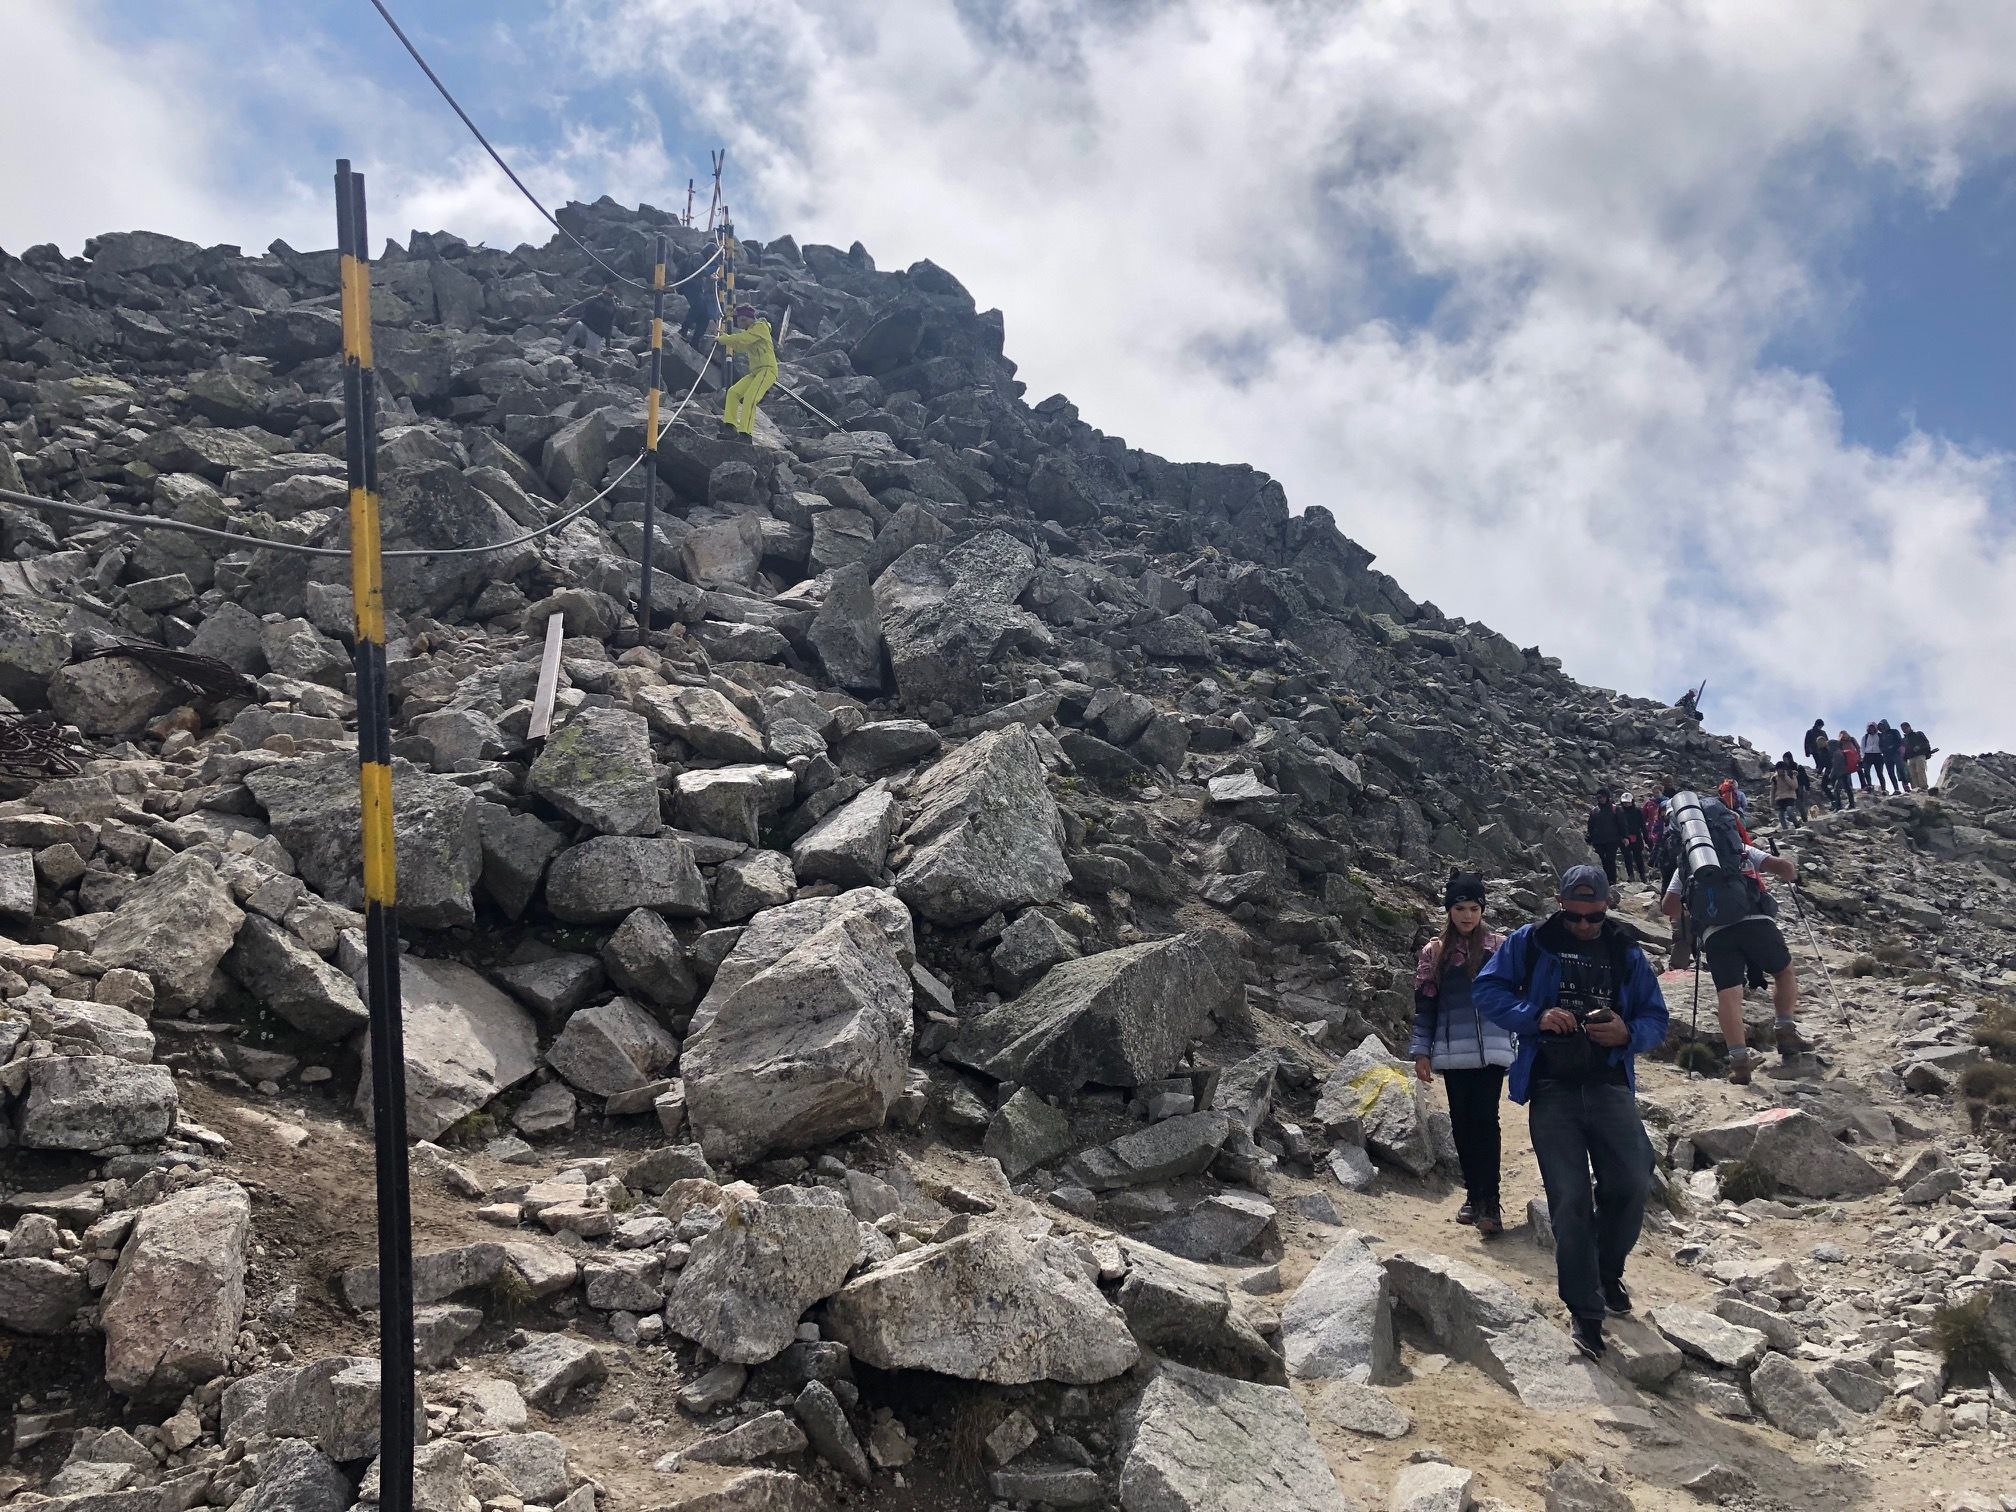 Caption: A photo showing the two paths that hikers can take on the last slope towards Musala Peak. On the left there are tall metal bars and metal cables fixed over large stones and on the right—a flatter path with sand and stones, with many people going up and down. (Local Guide @FelipePk)